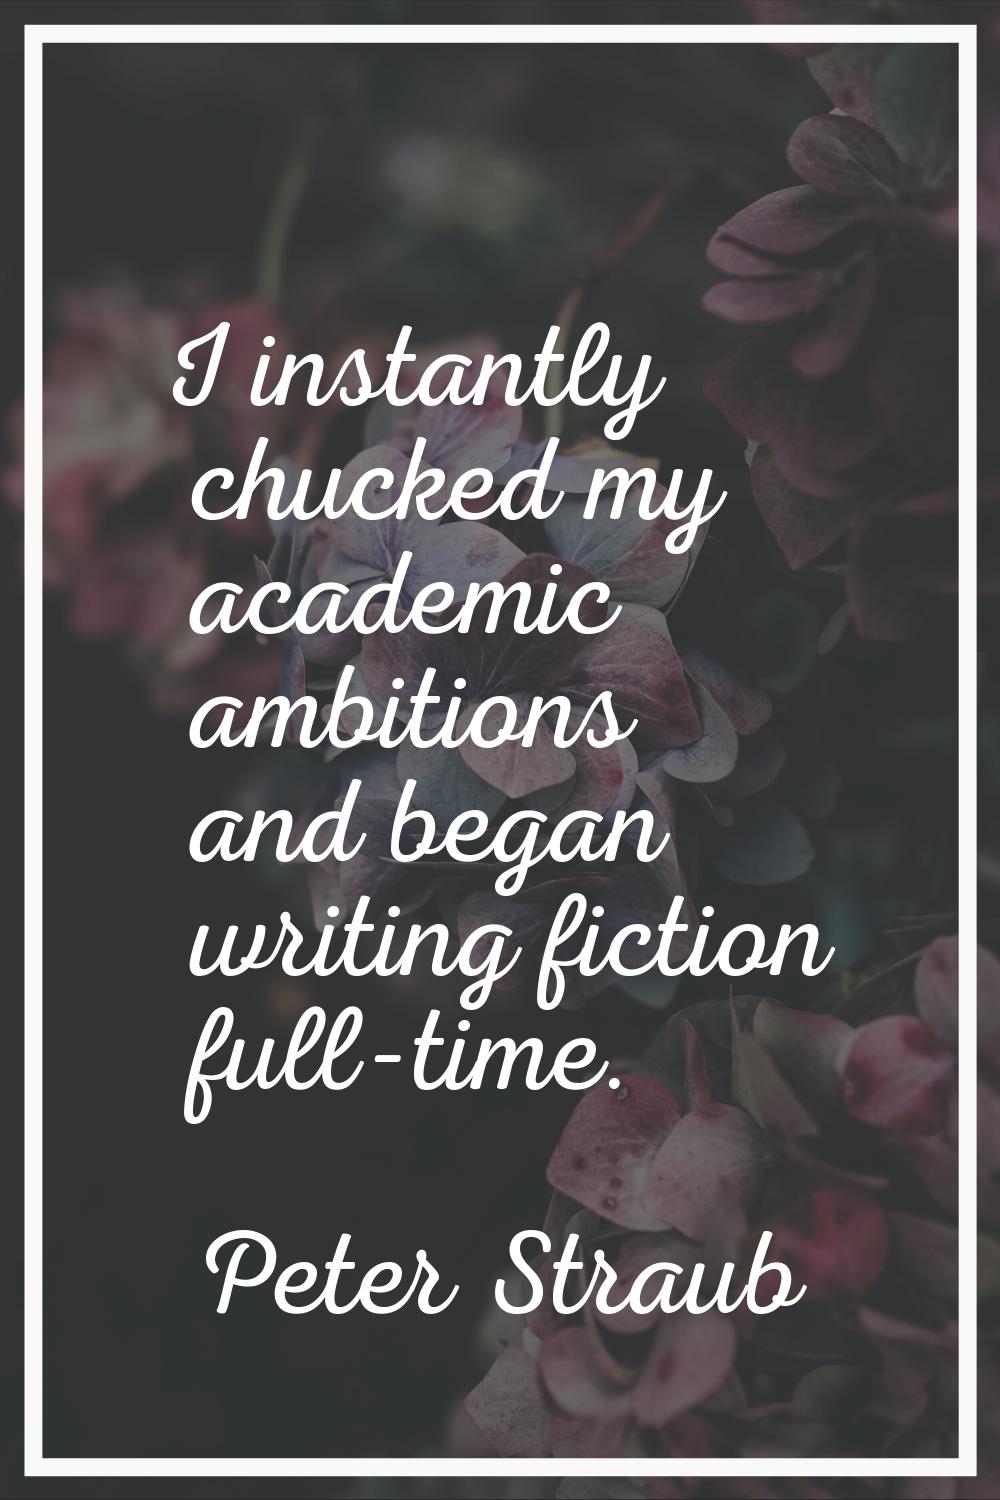 I instantly chucked my academic ambitions and began writing fiction full-time.